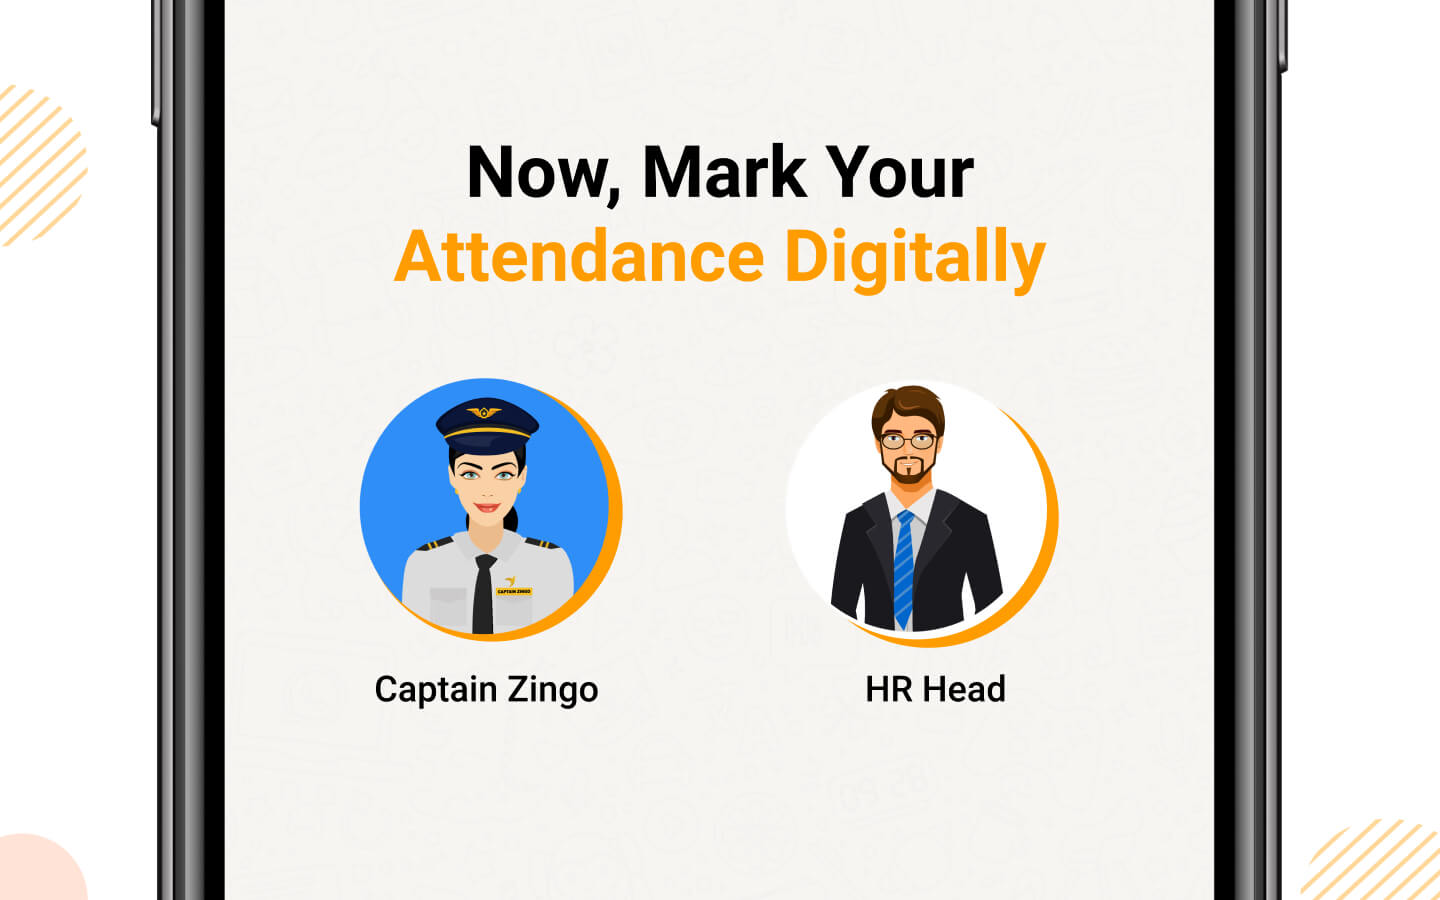 Now, Mark Your Attendance Digitally